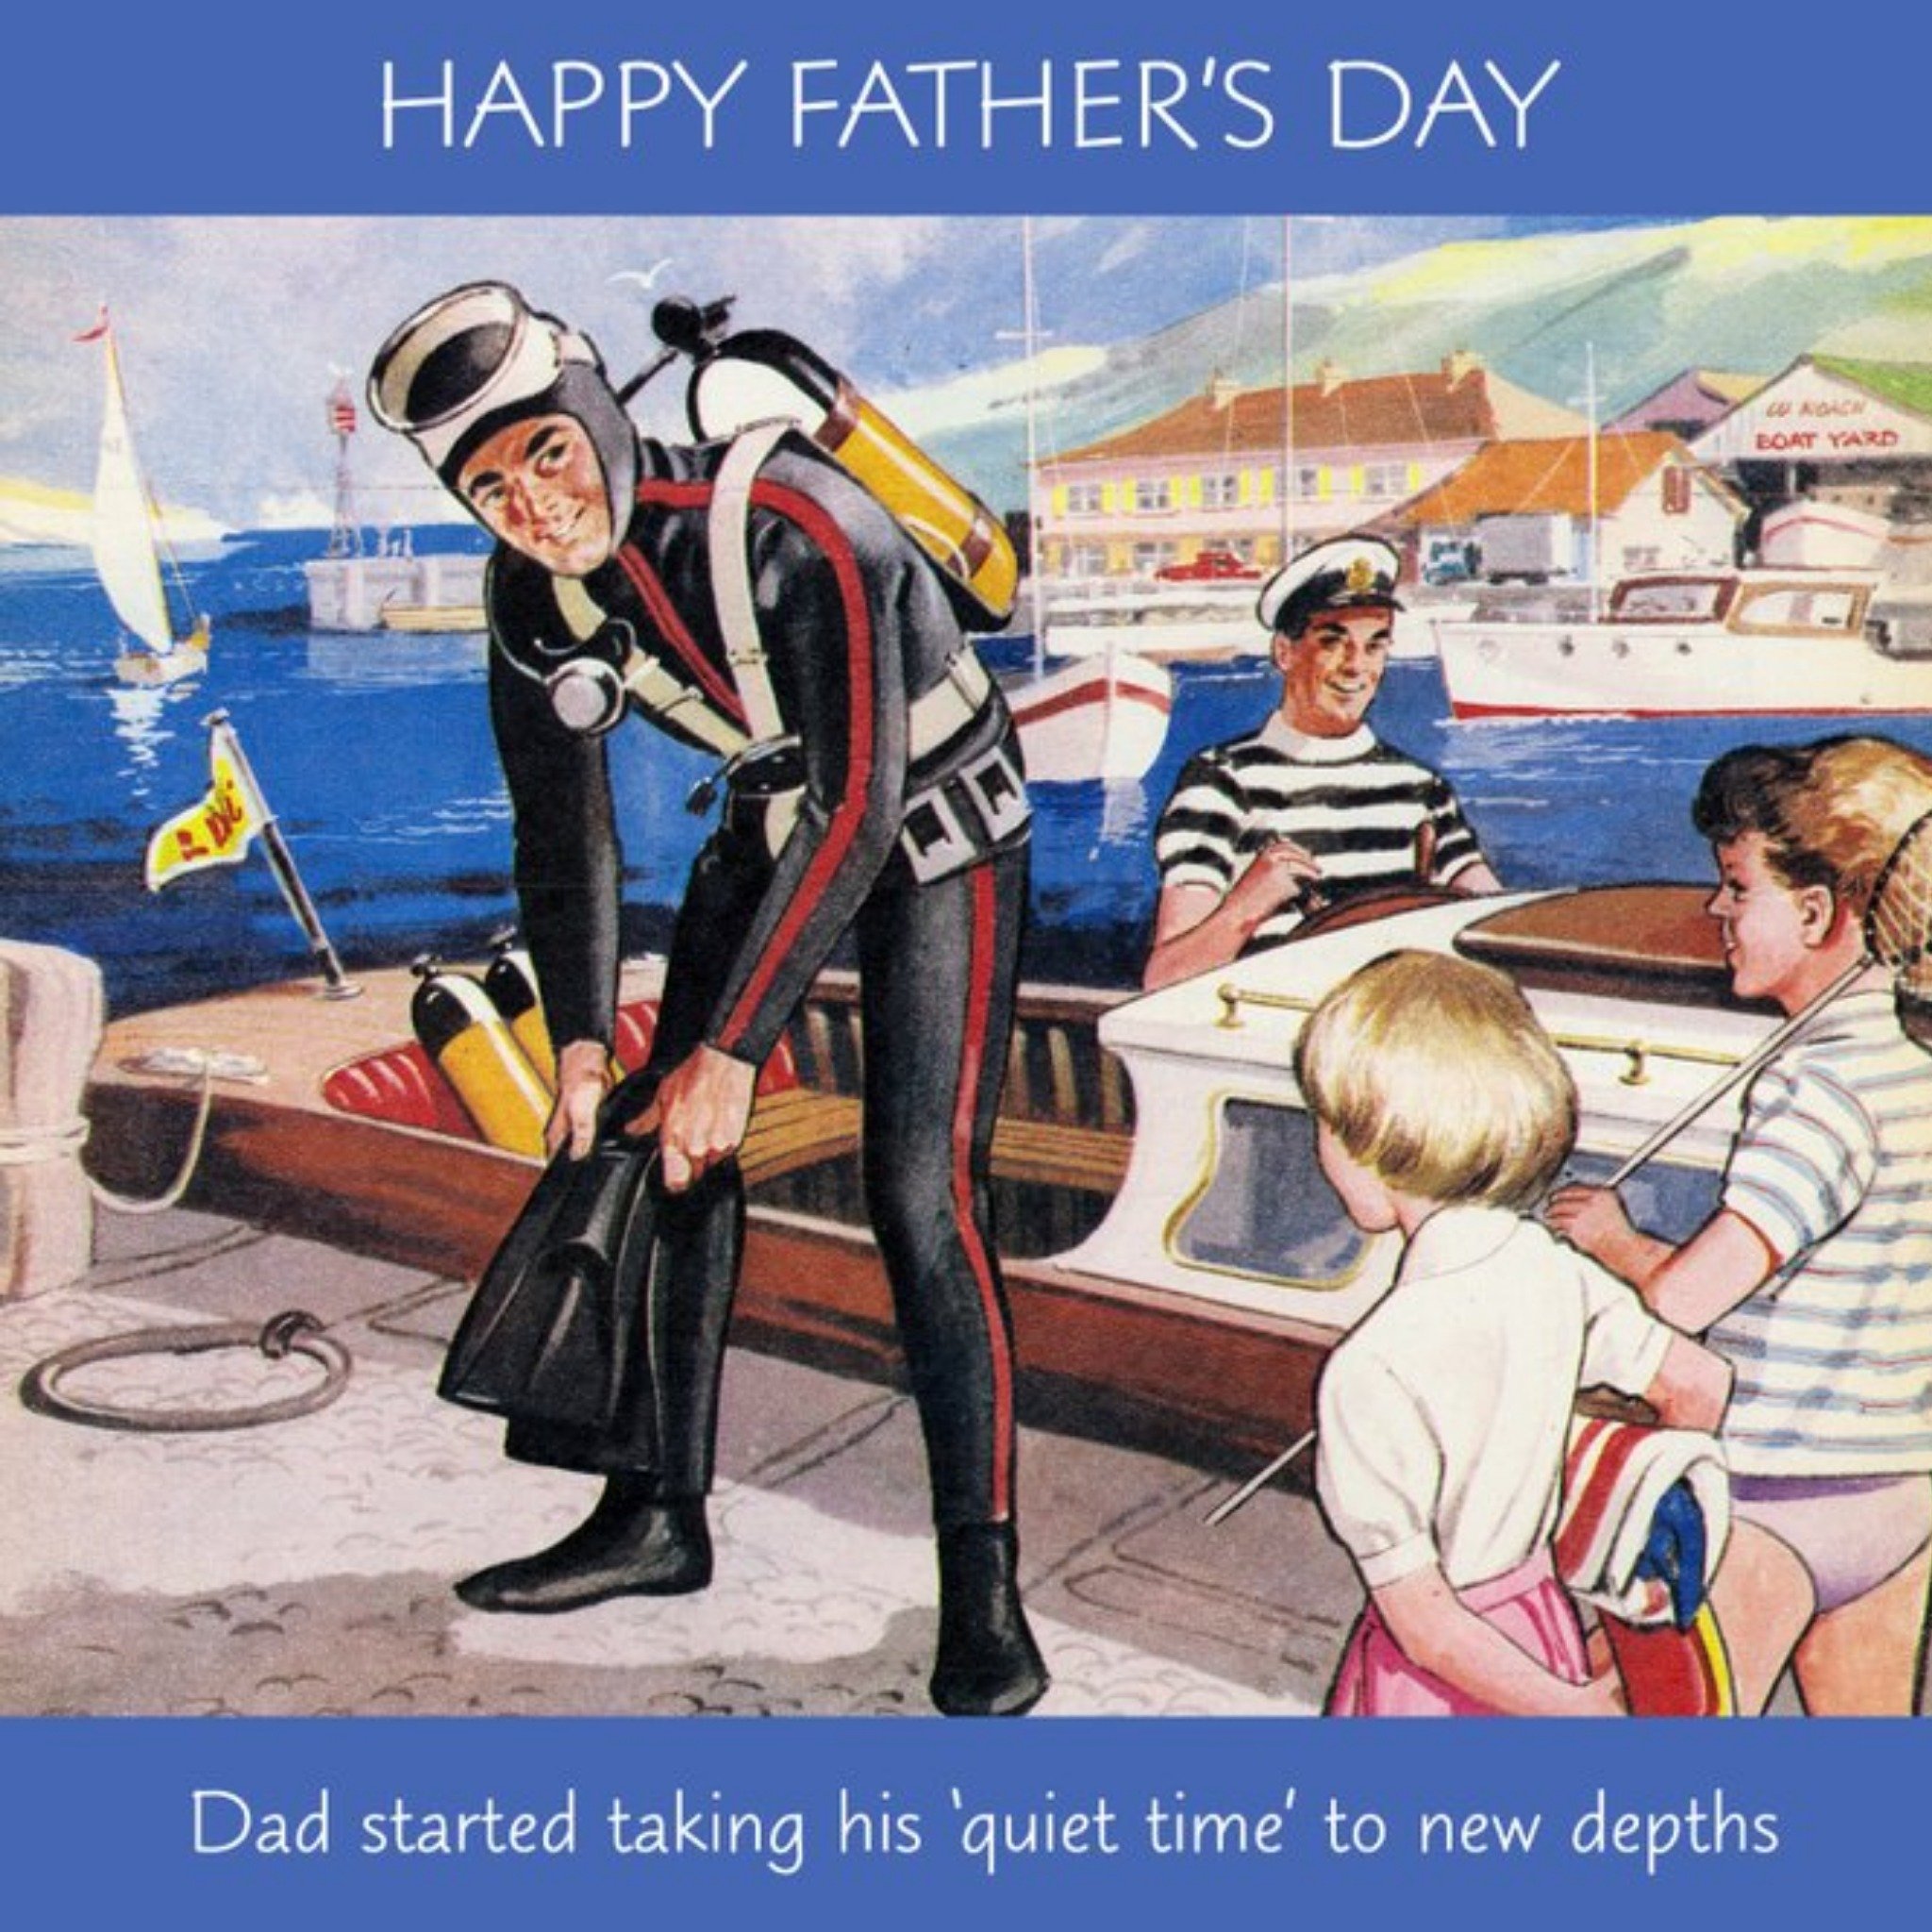 Moonpig Father's Day Card - Scuba Dive - Sailing - Funny Card, Square